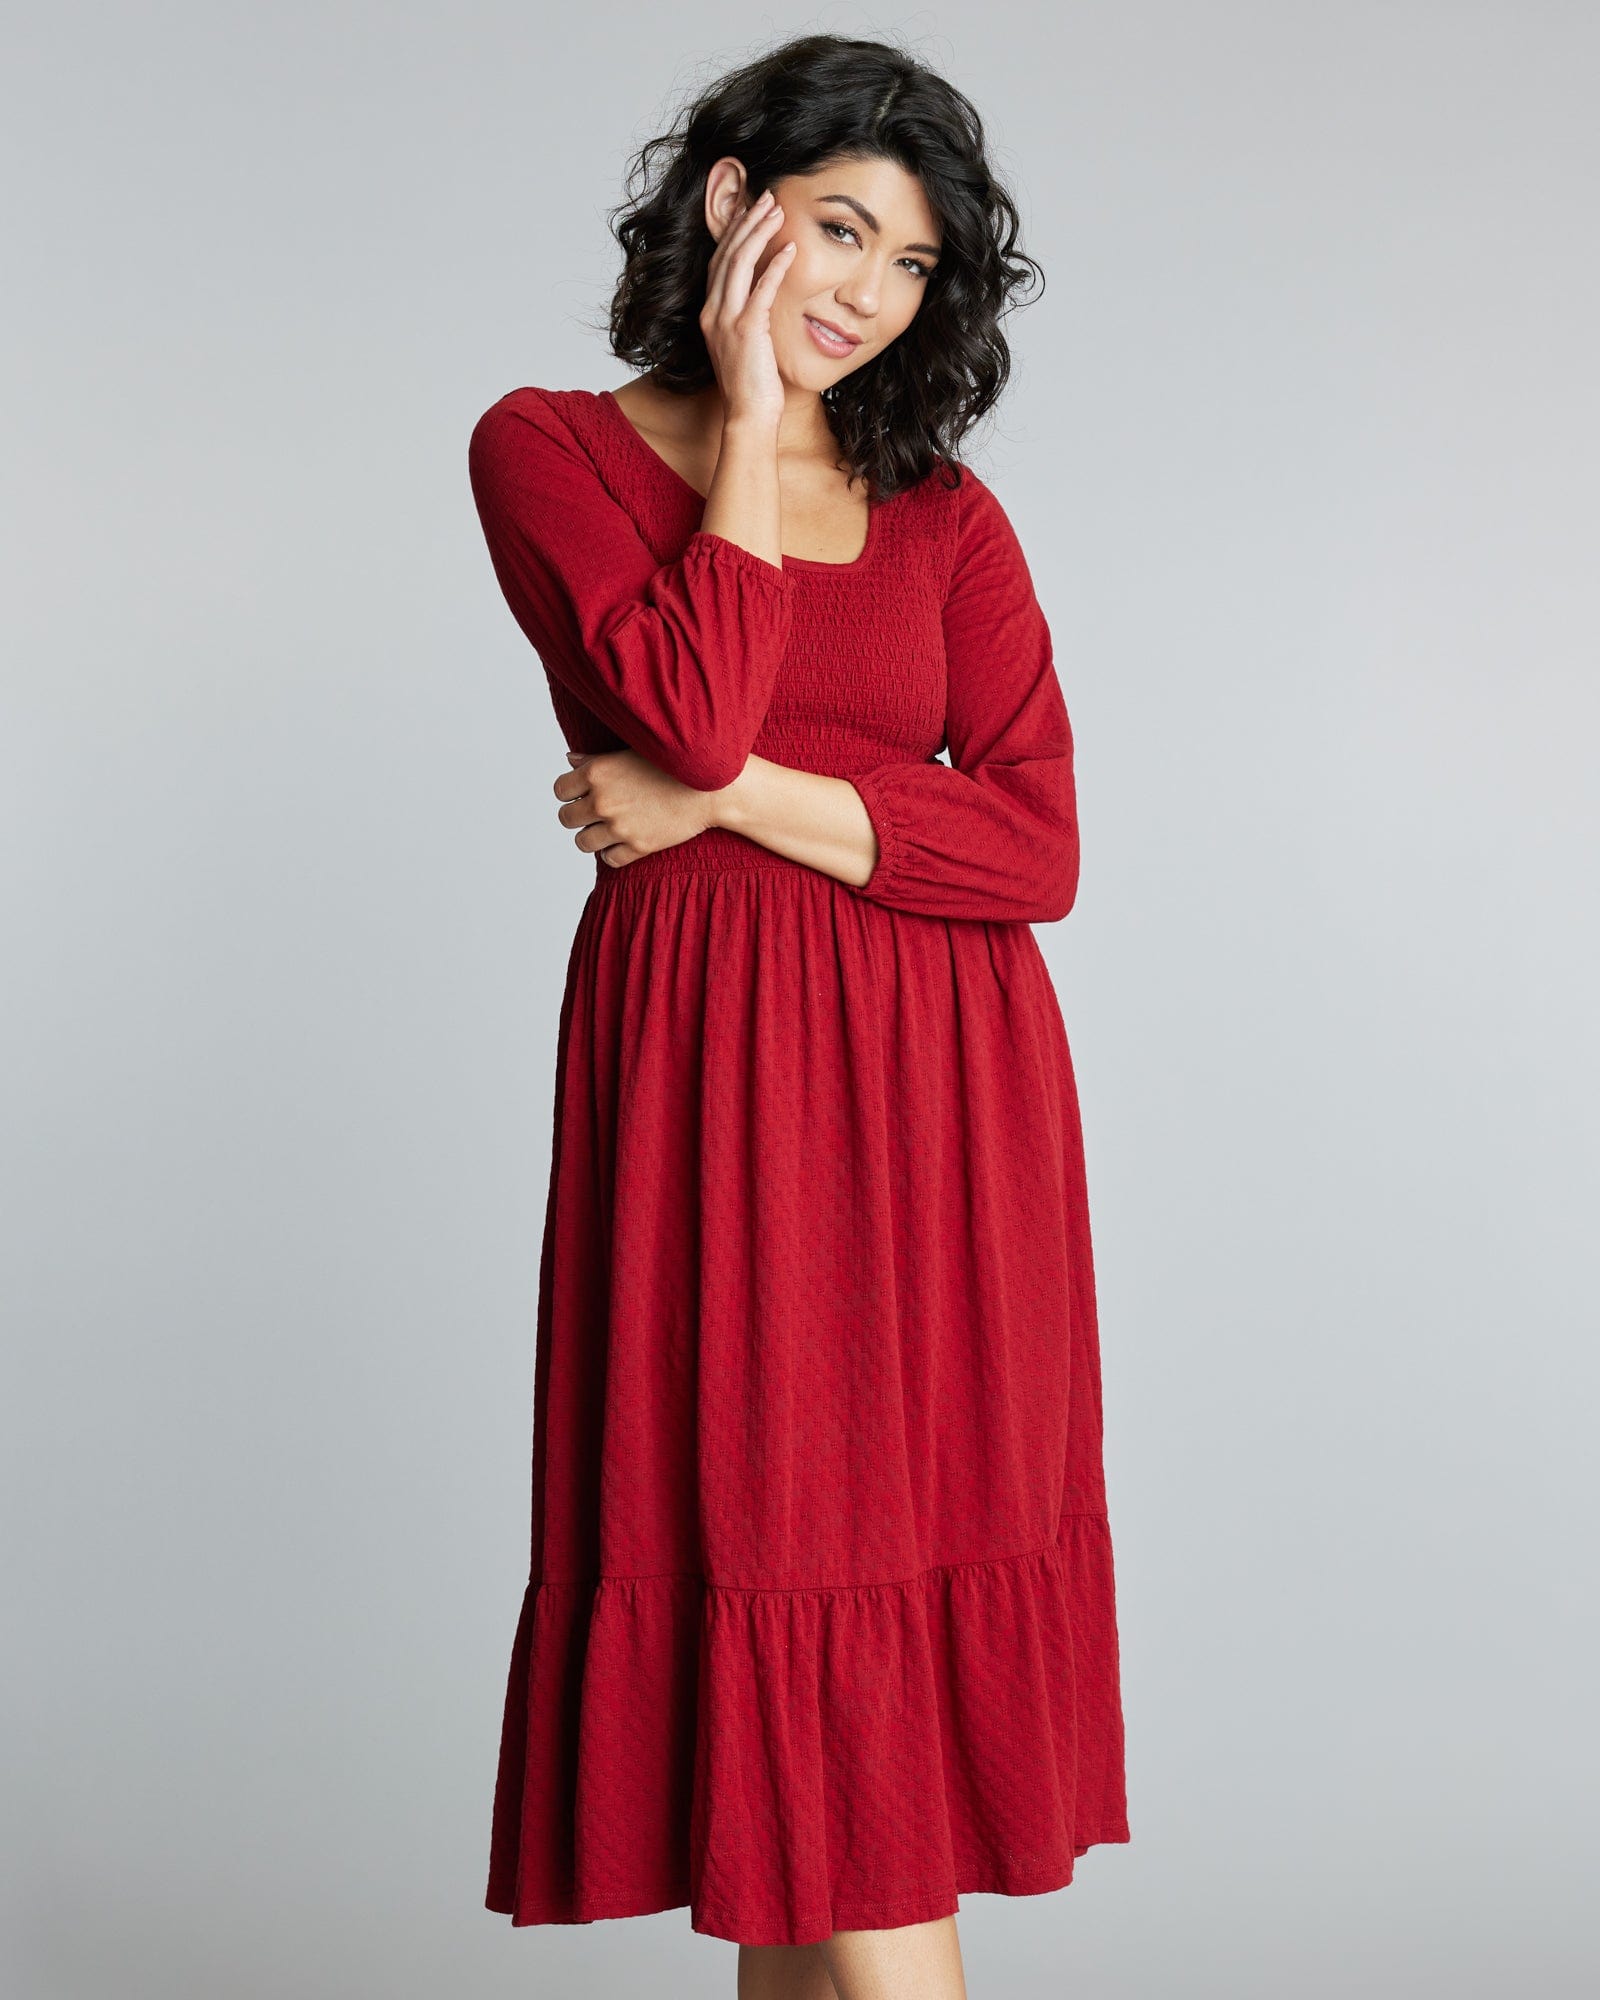 Woman in a 3/4 sleeve, red, midi-length dress